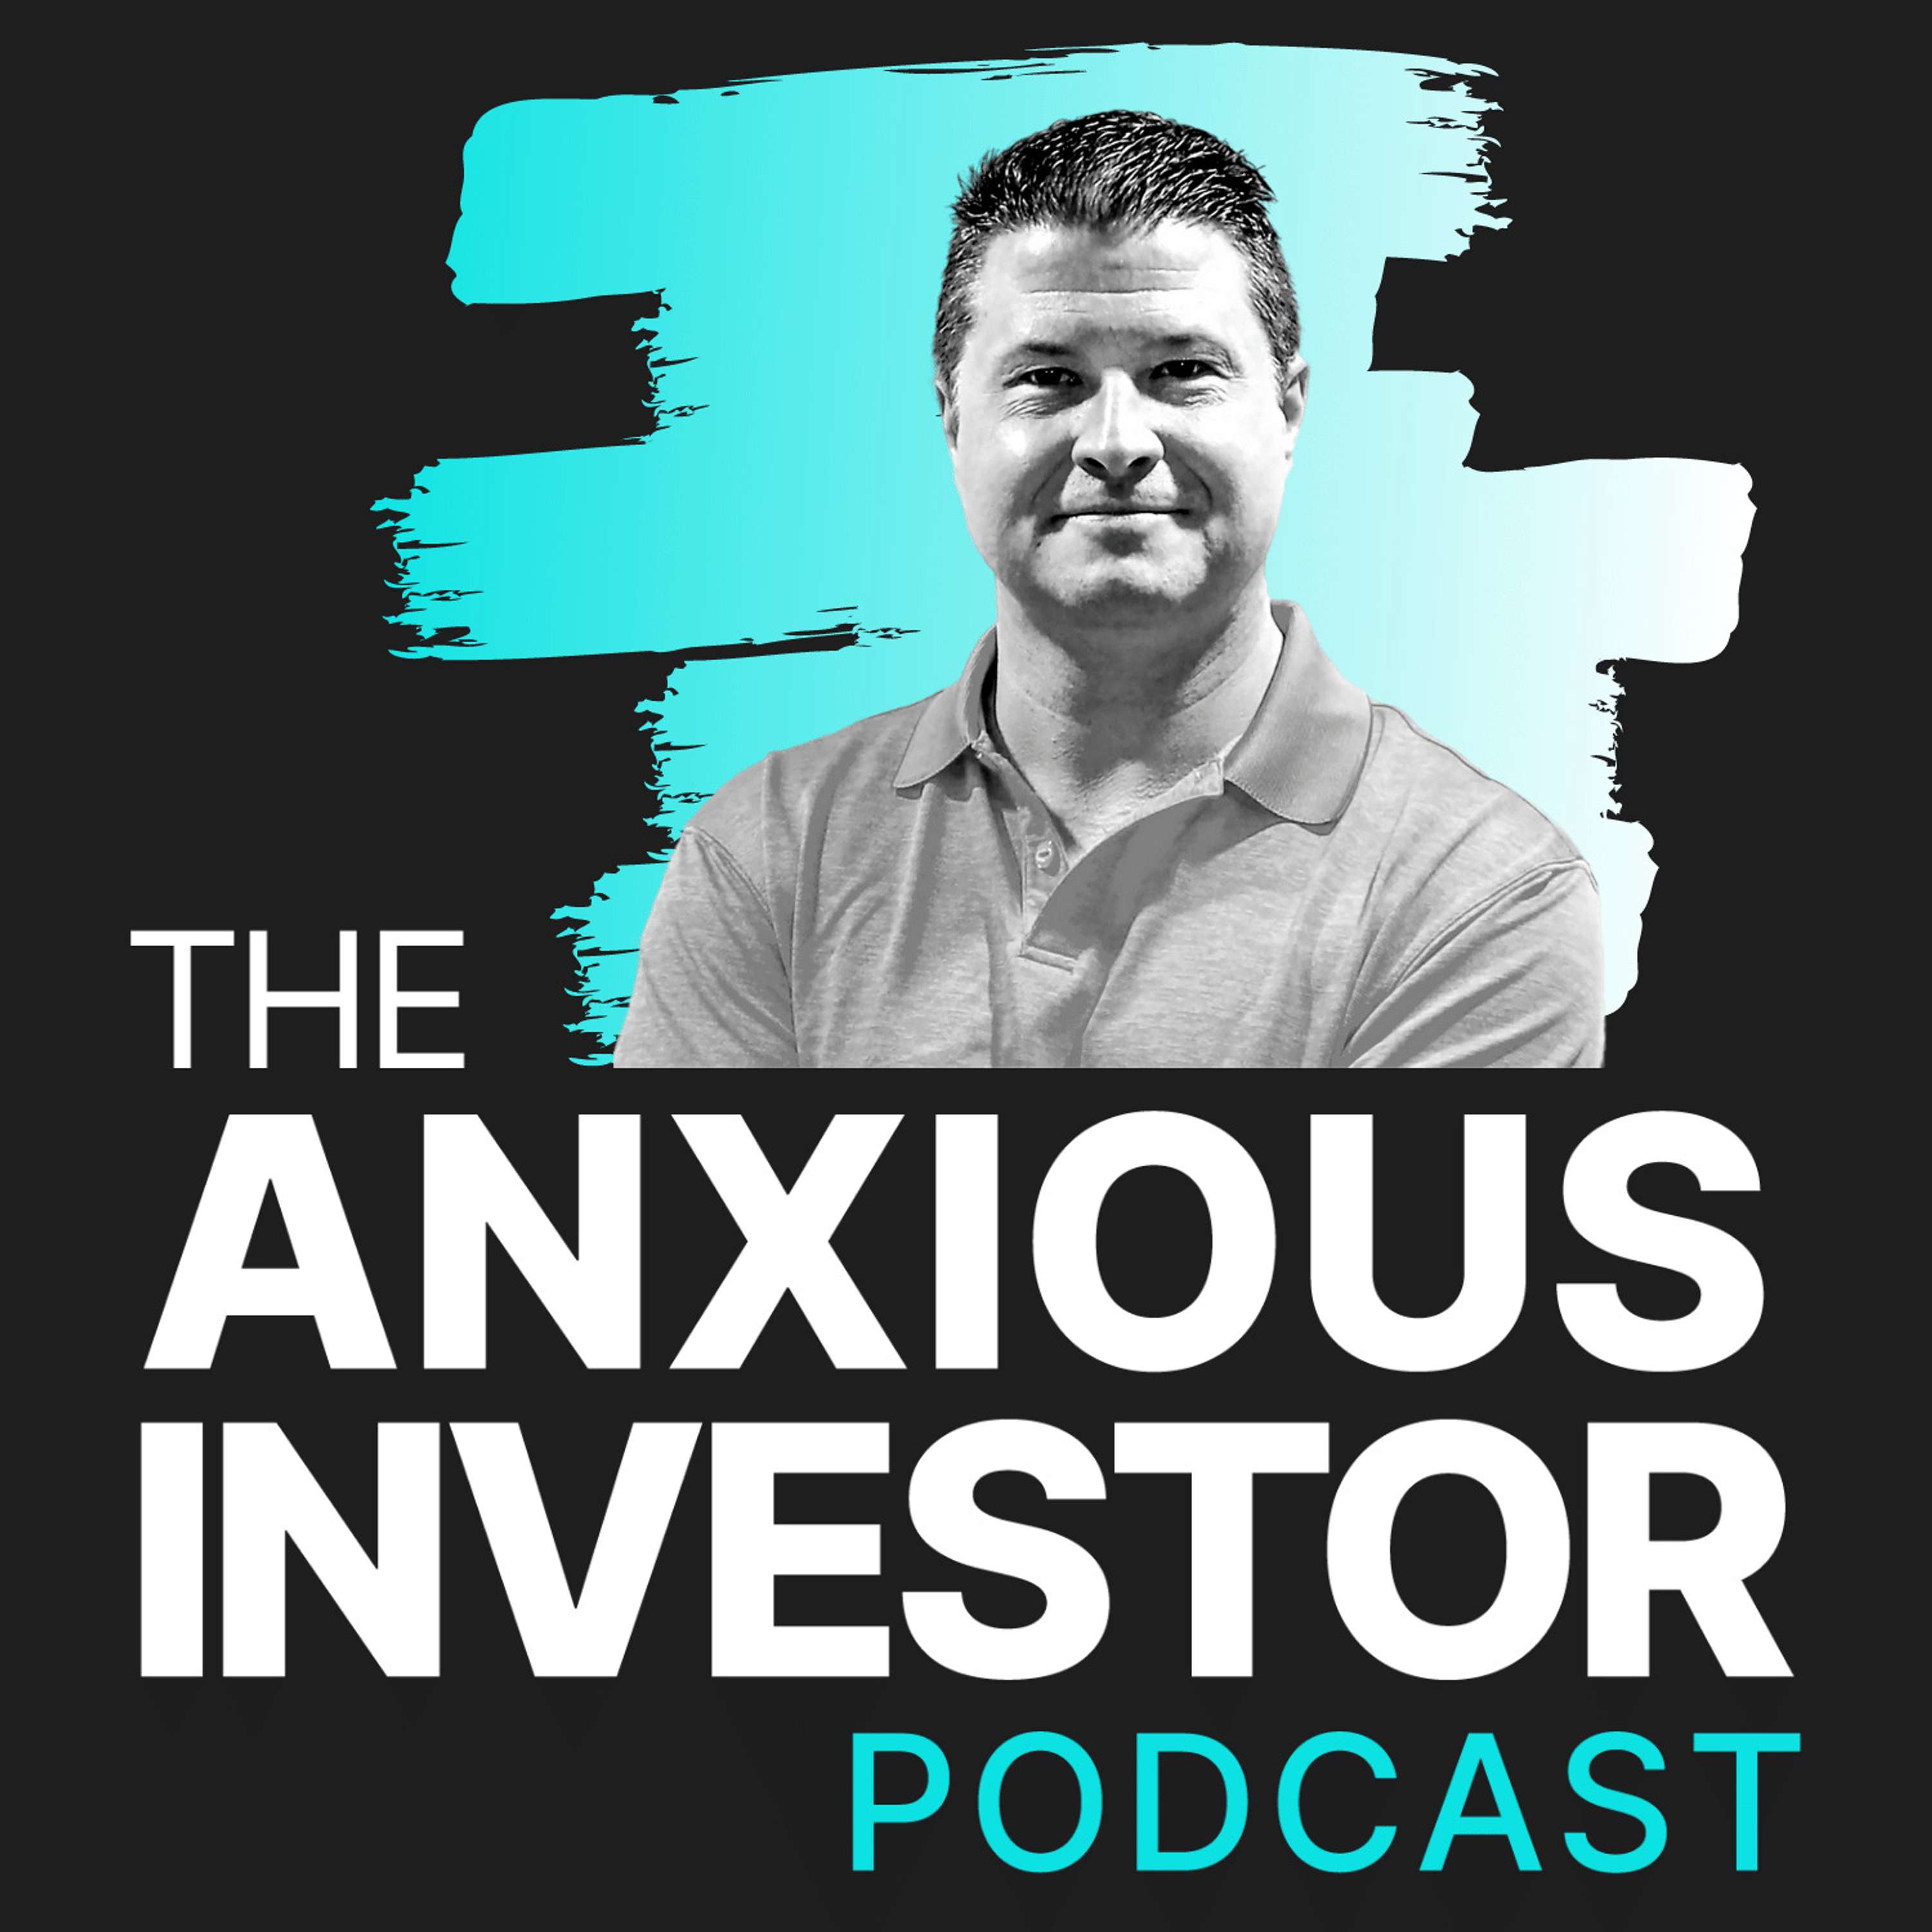 The Anxious Investor